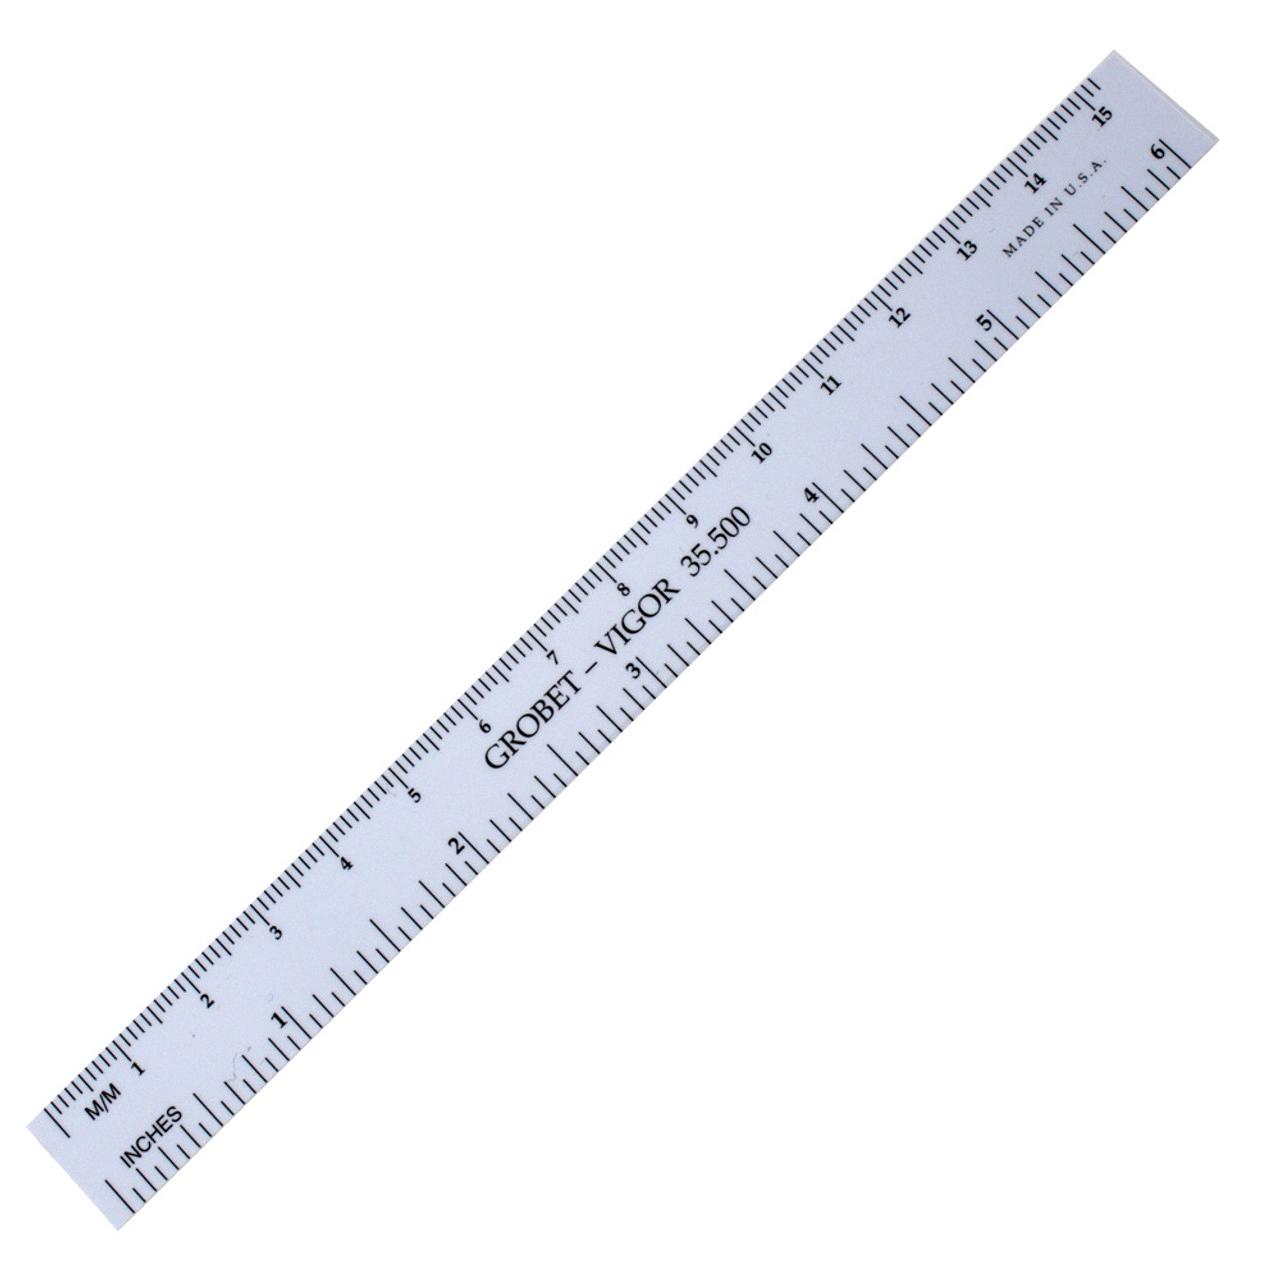 millimeters on a ruler